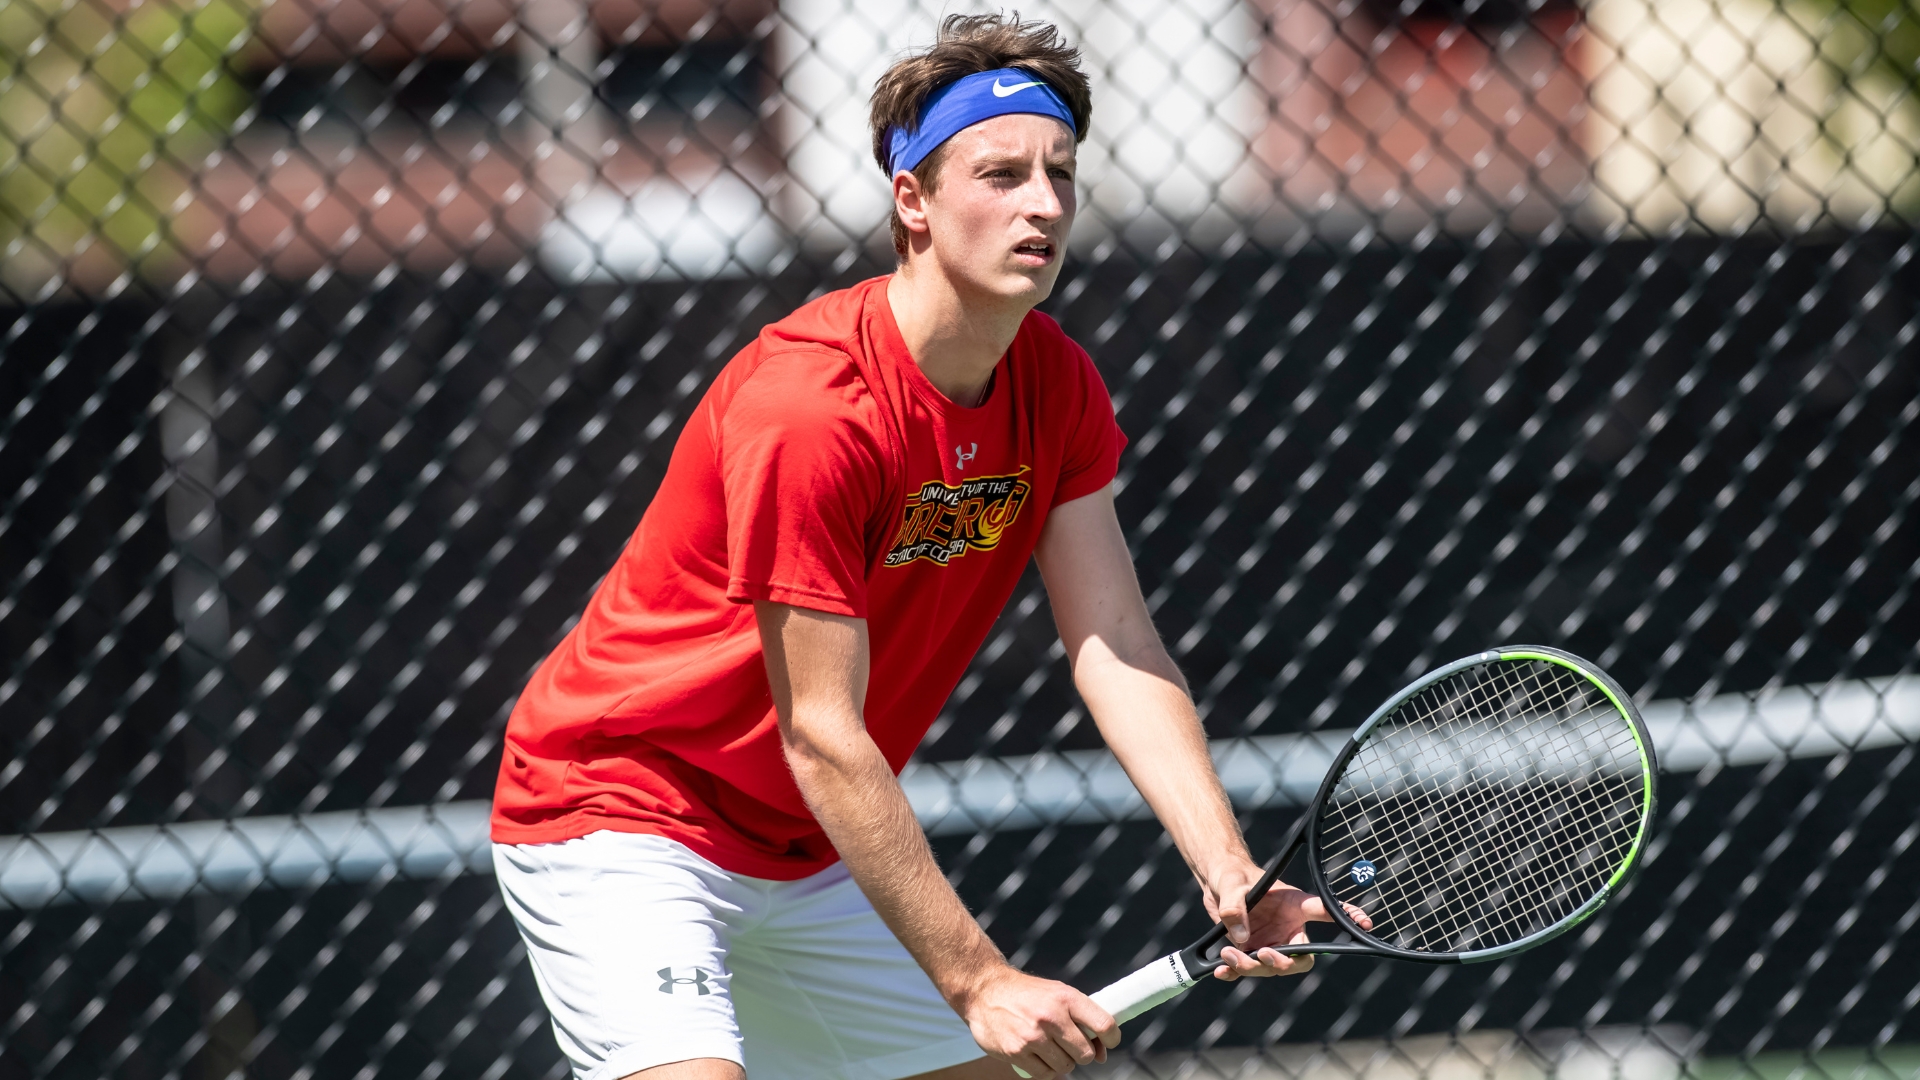 Mangeon went 2-0 on the day winning at both No.1 singles and doubles play.